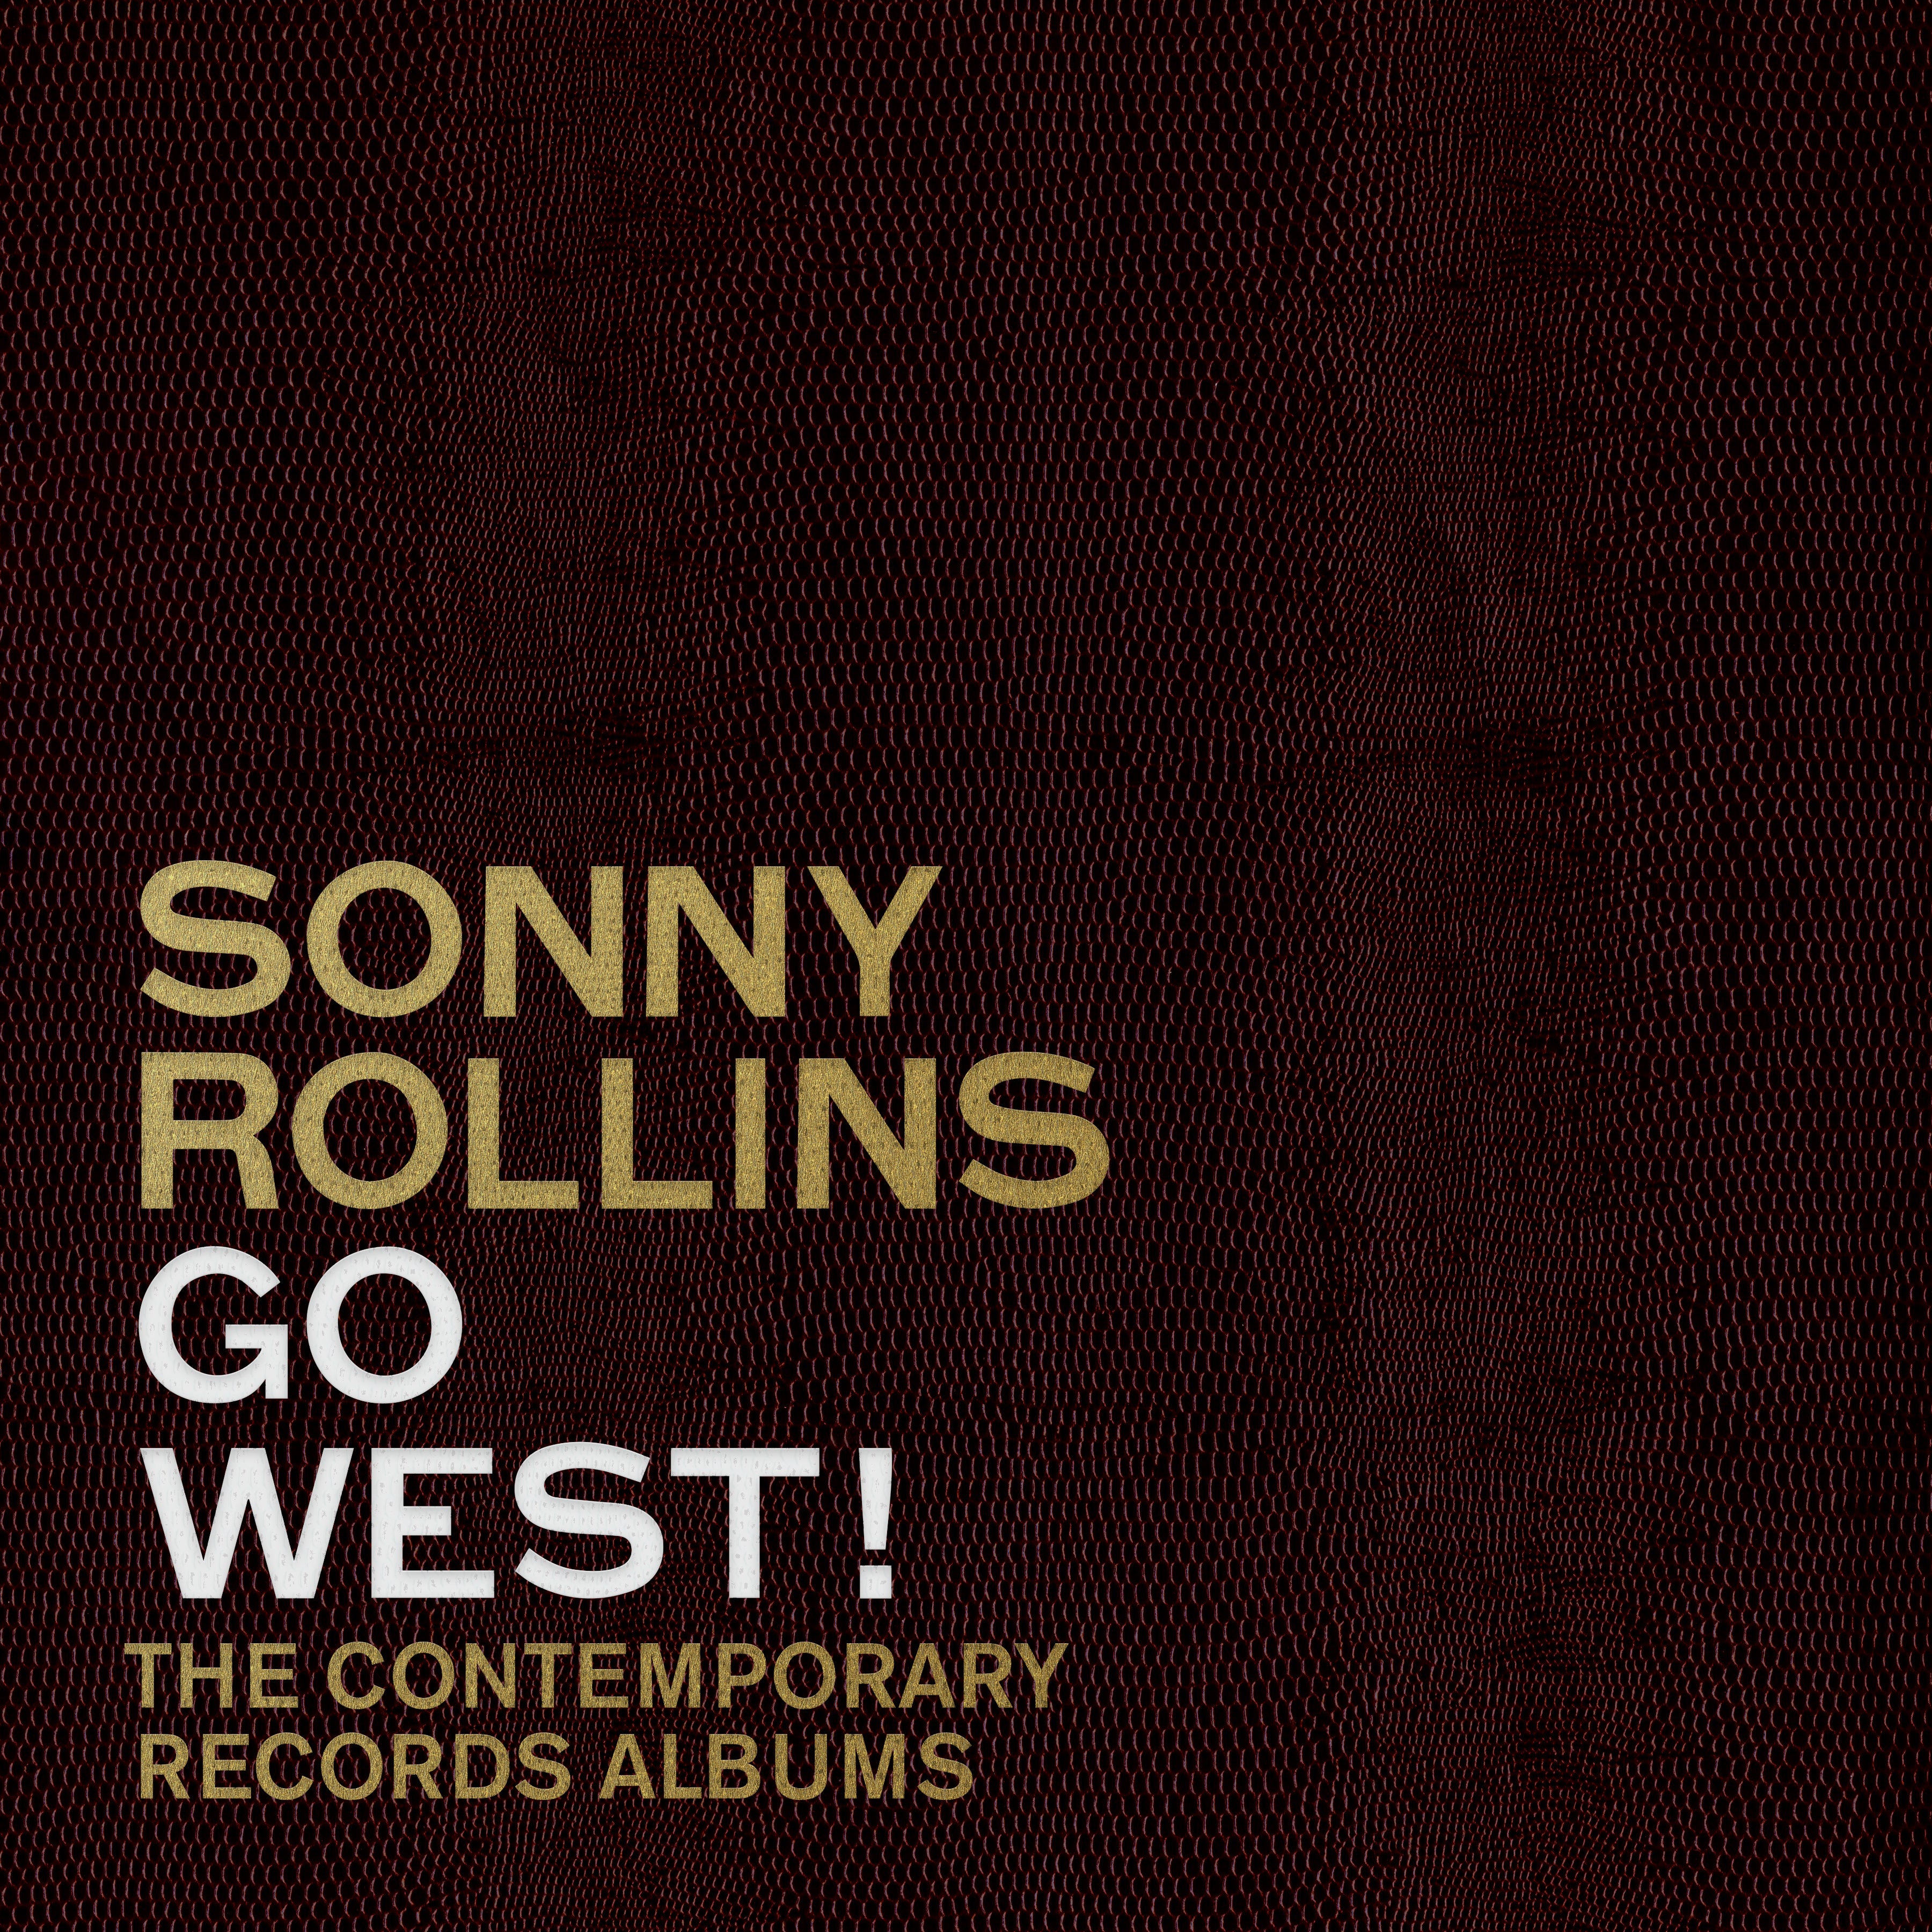 NEW SONNY ROLLINS COLLECTION GO WEST!: THE CONTEMPORARY RECORDS